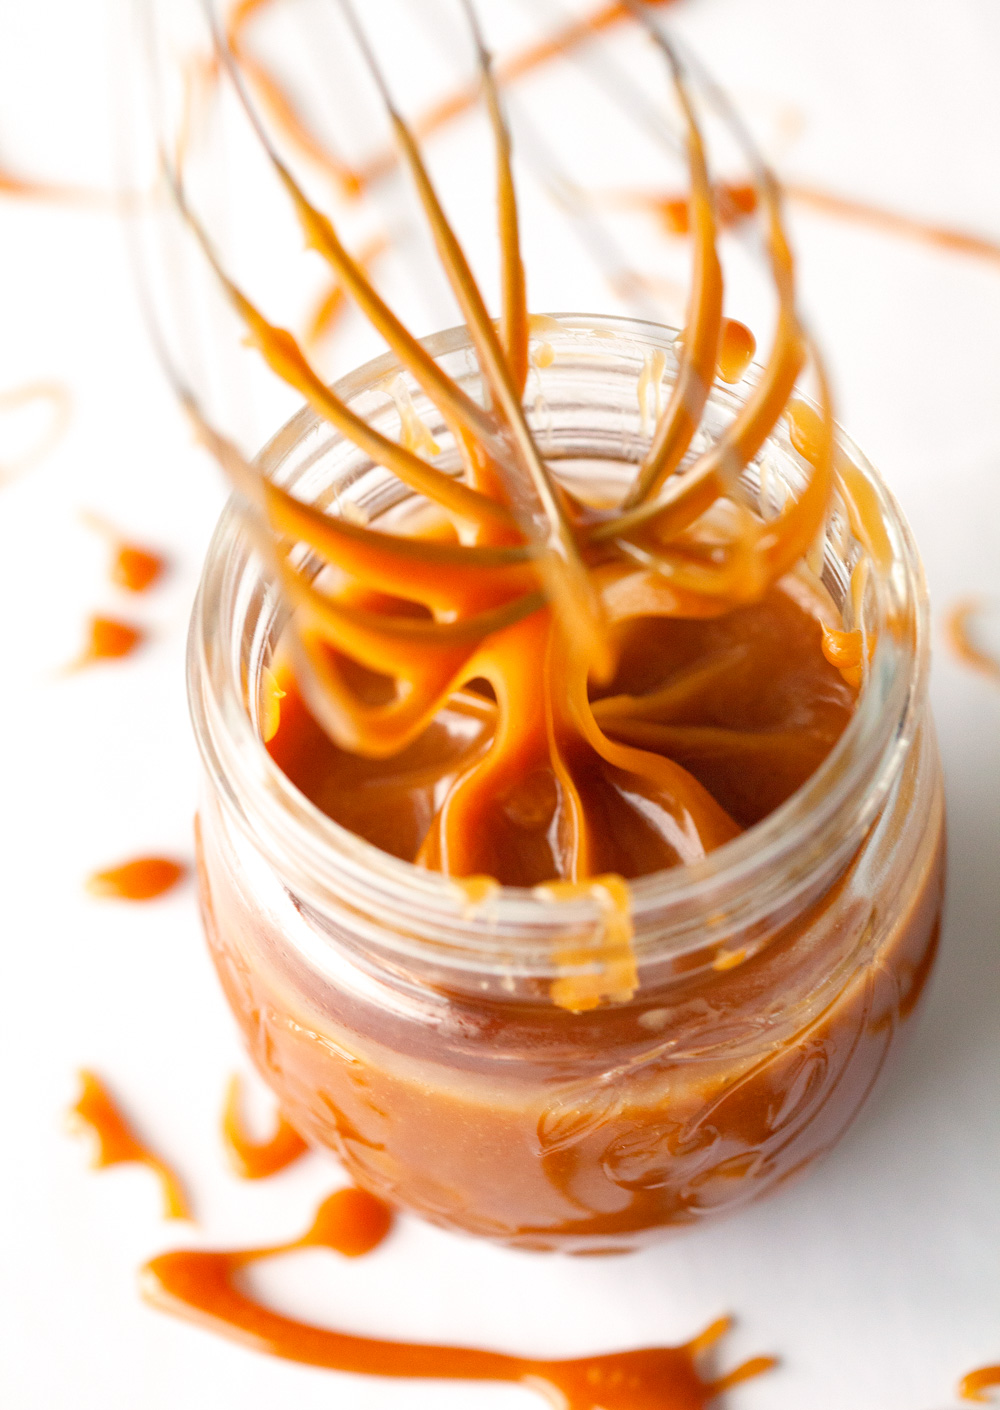 Salted Caramel Sauce by Deliciously Yum!